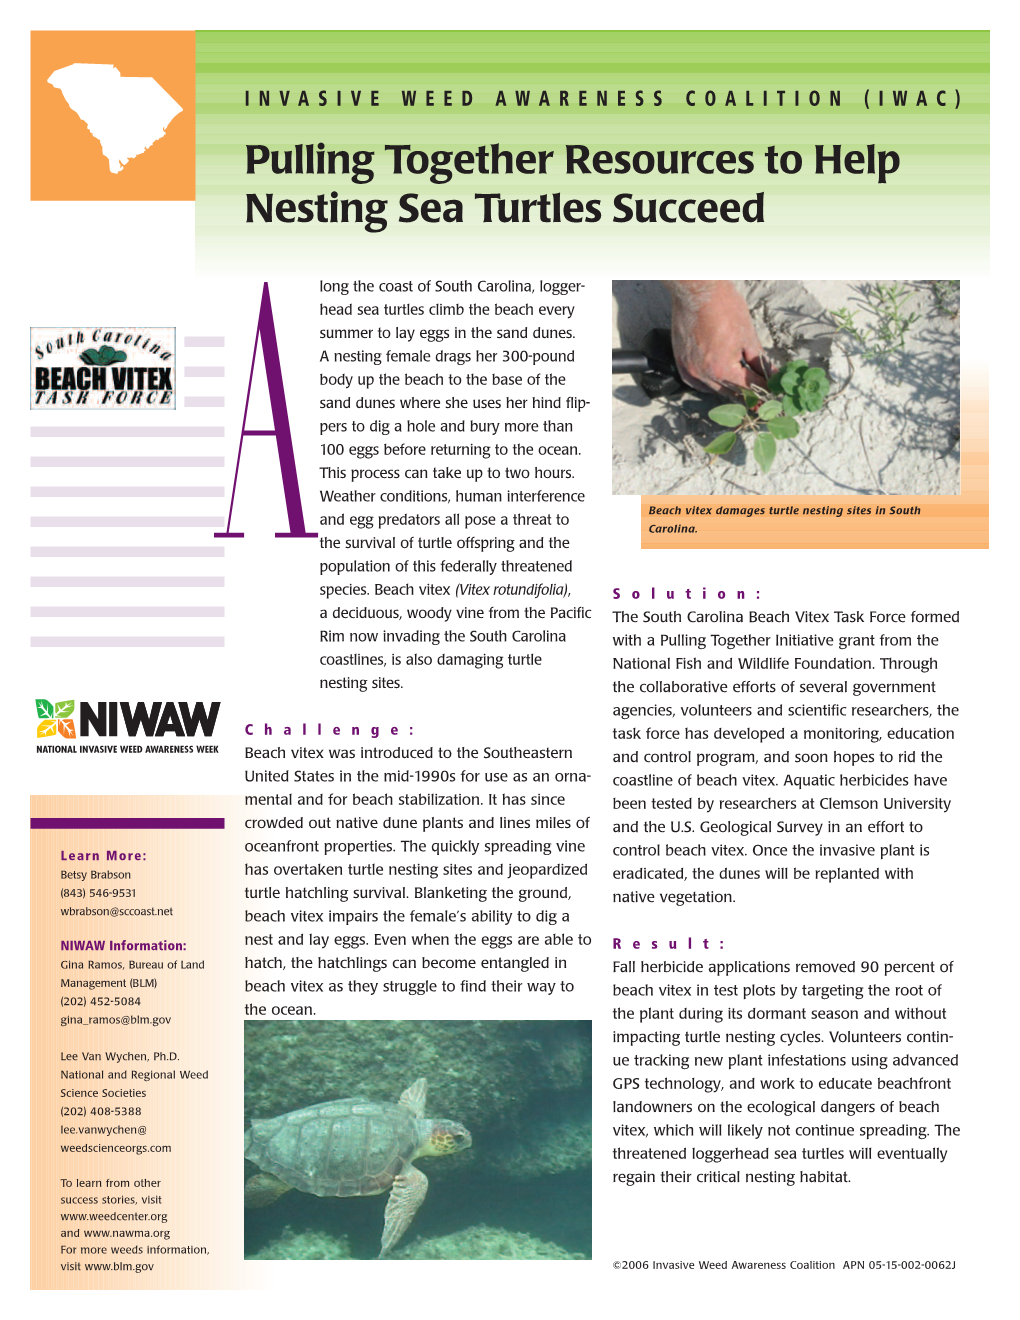 Pulling Together Resources to Help Nesting Sea Turtles Succeed